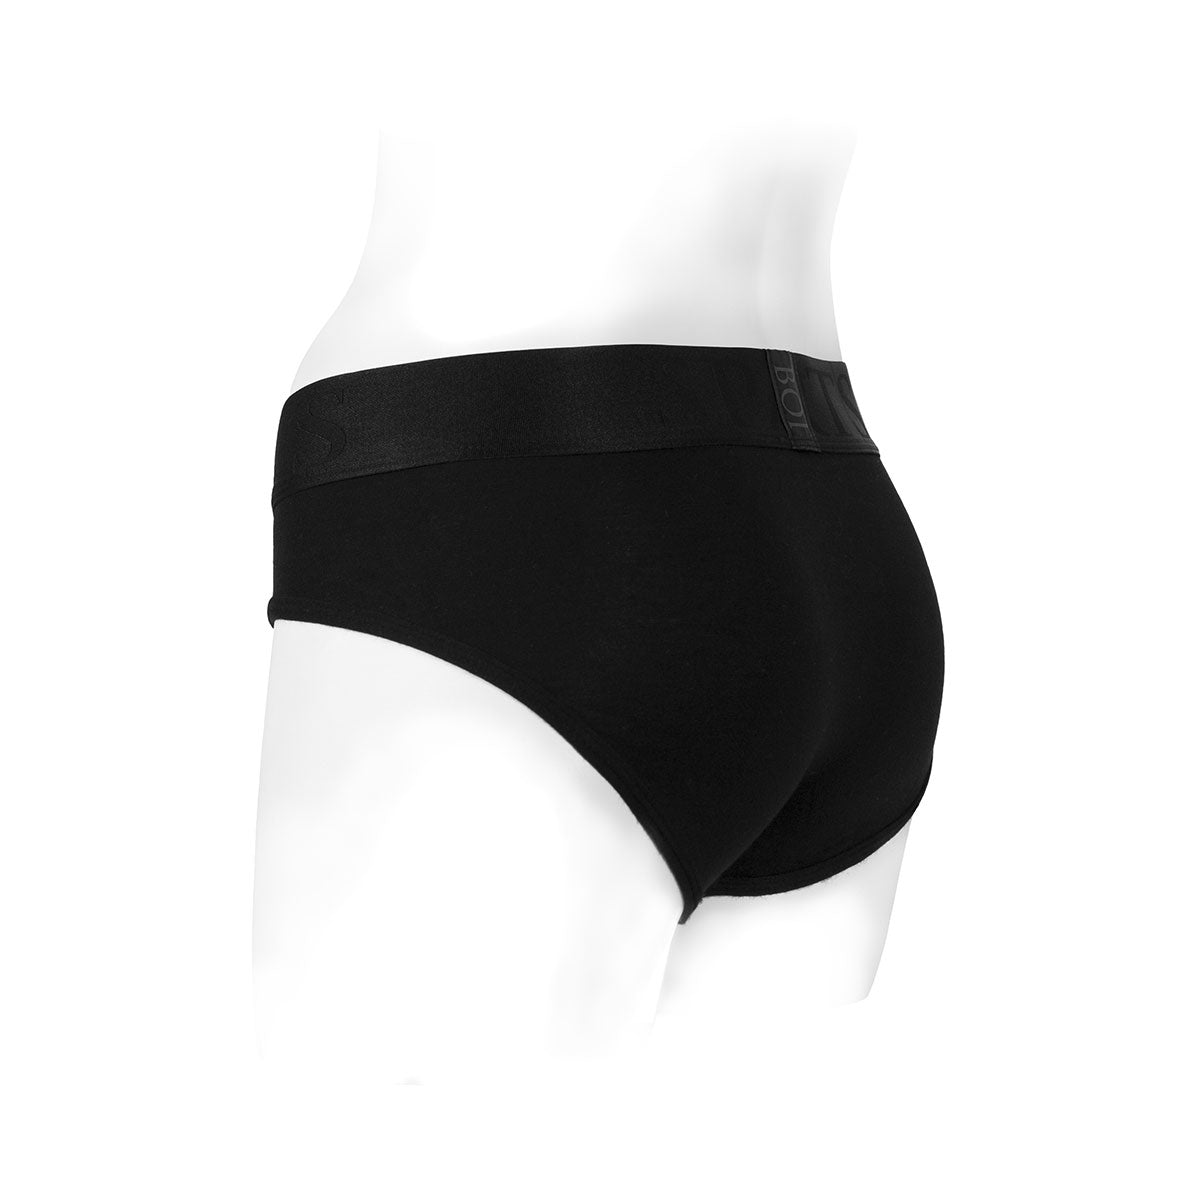 SpareParts Tomboi Rayon Brief Harness Black Size L